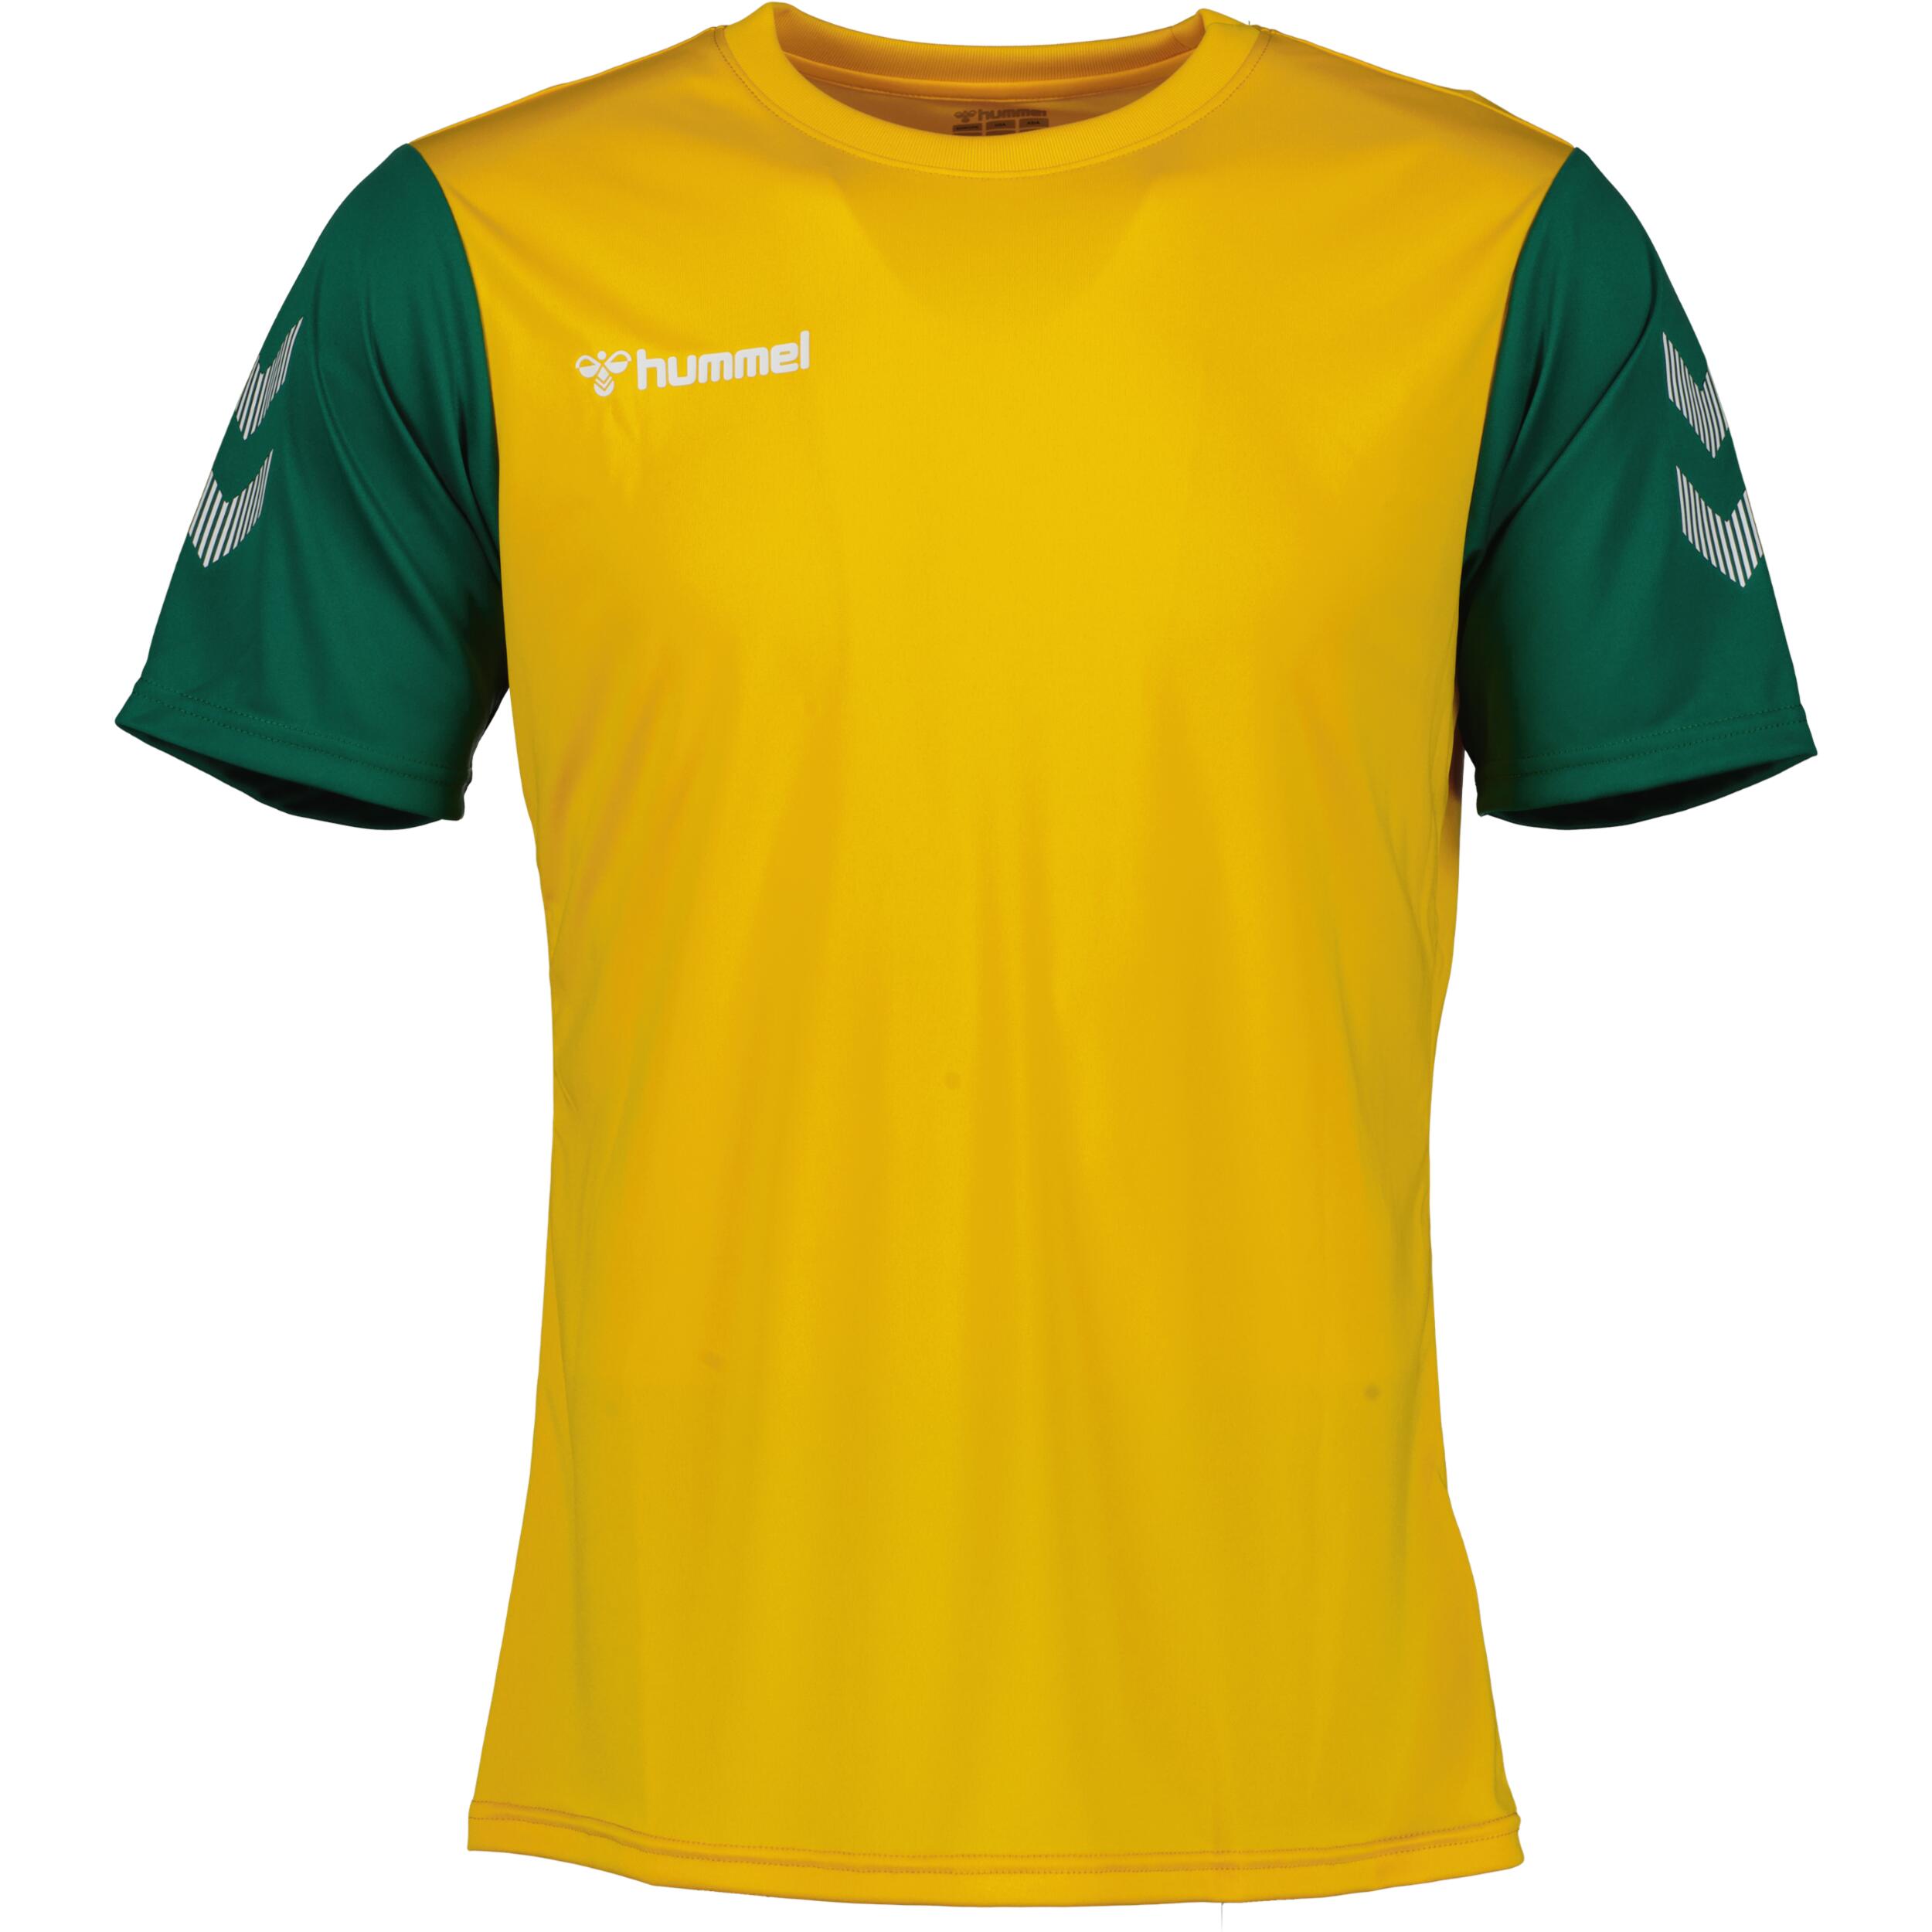 HUMMEL Match jersey for men, great for football, in yellow/evergreen